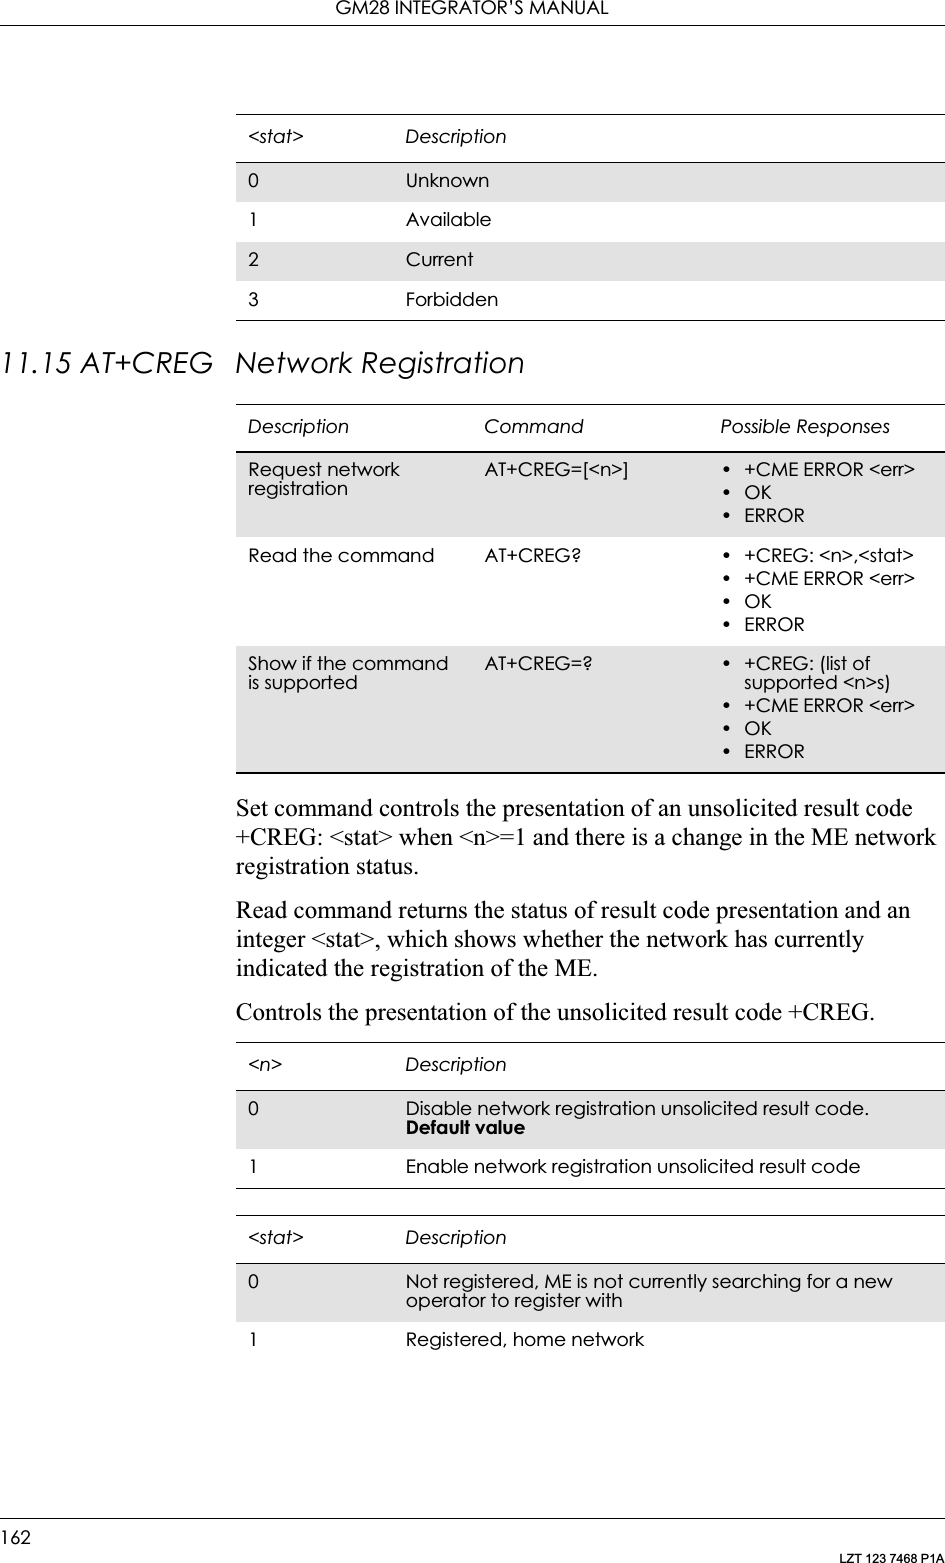 GM28 INTEGRATOR’S MANUAL162LZT 123 7468 P1A11.15 AT+CREG Network RegistrationSet command controls the presentation of an unsolicited result code +CREG: &lt;stat&gt; when &lt;n&gt;=1 and there is a change in the ME network registration status.Read command returns the status of result code presentation and an integer &lt;stat&gt;, which shows whether the network has currently indicated the registration of the ME. Controls the presentation of the unsolicited result code +CREG.&lt;stat&gt; Description0Unknown1 Available2Current3 ForbiddenDescription Command Possible ResponsesRequest network registrationAT+CREG=[&lt;n&gt;] •+CME ERROR &lt;err&gt;•OK•ERRORRead the command AT+CREG? • +CREG: &lt;n&gt;,&lt;stat&gt;•+CME ERROR &lt;err&gt;•OK•ERRORShow if the command is supportedAT+CREG=? • +CREG: (list of supported &lt;n&gt;s)•+CME ERROR &lt;err&gt;•OK•ERROR&lt;n&gt; Description0Disable network registration unsolicited result code. Default value1 Enable network registration unsolicited result code&lt;stat&gt; Description0Not registered, ME is not currently searching for a new operator to register with1 Registered, home network